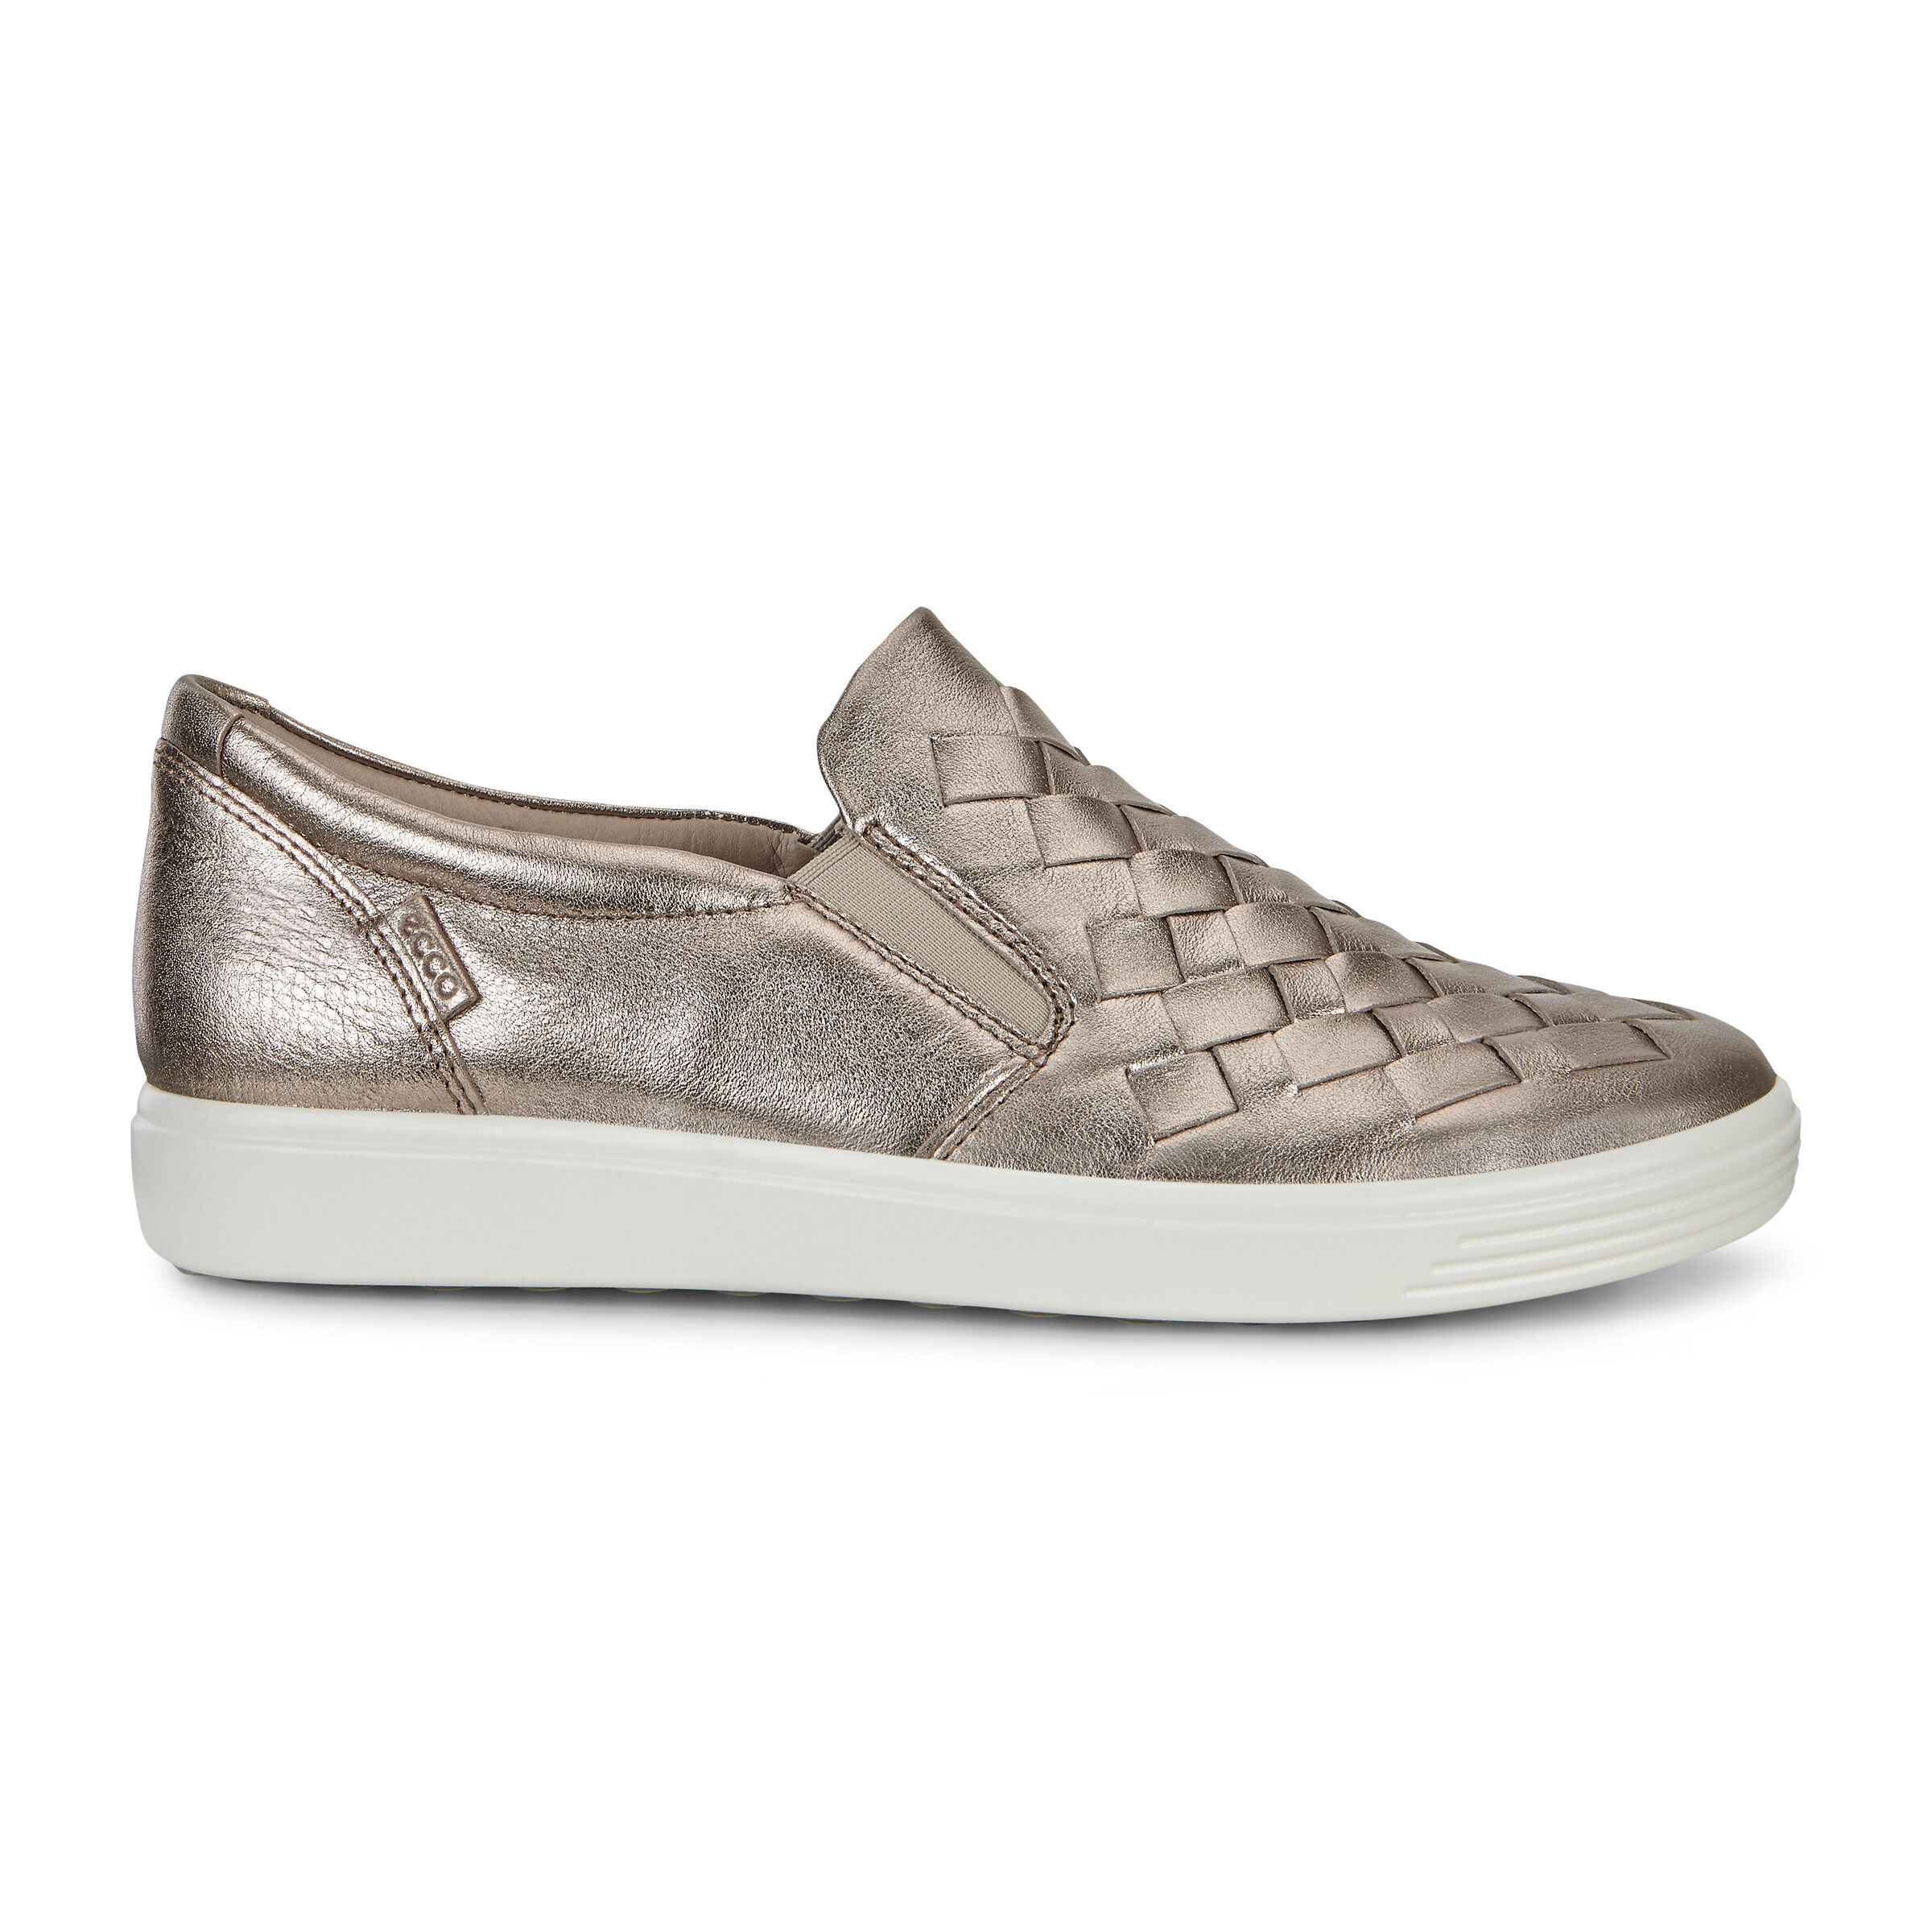 Women's casual shoes on sale | ECCO® Shoes